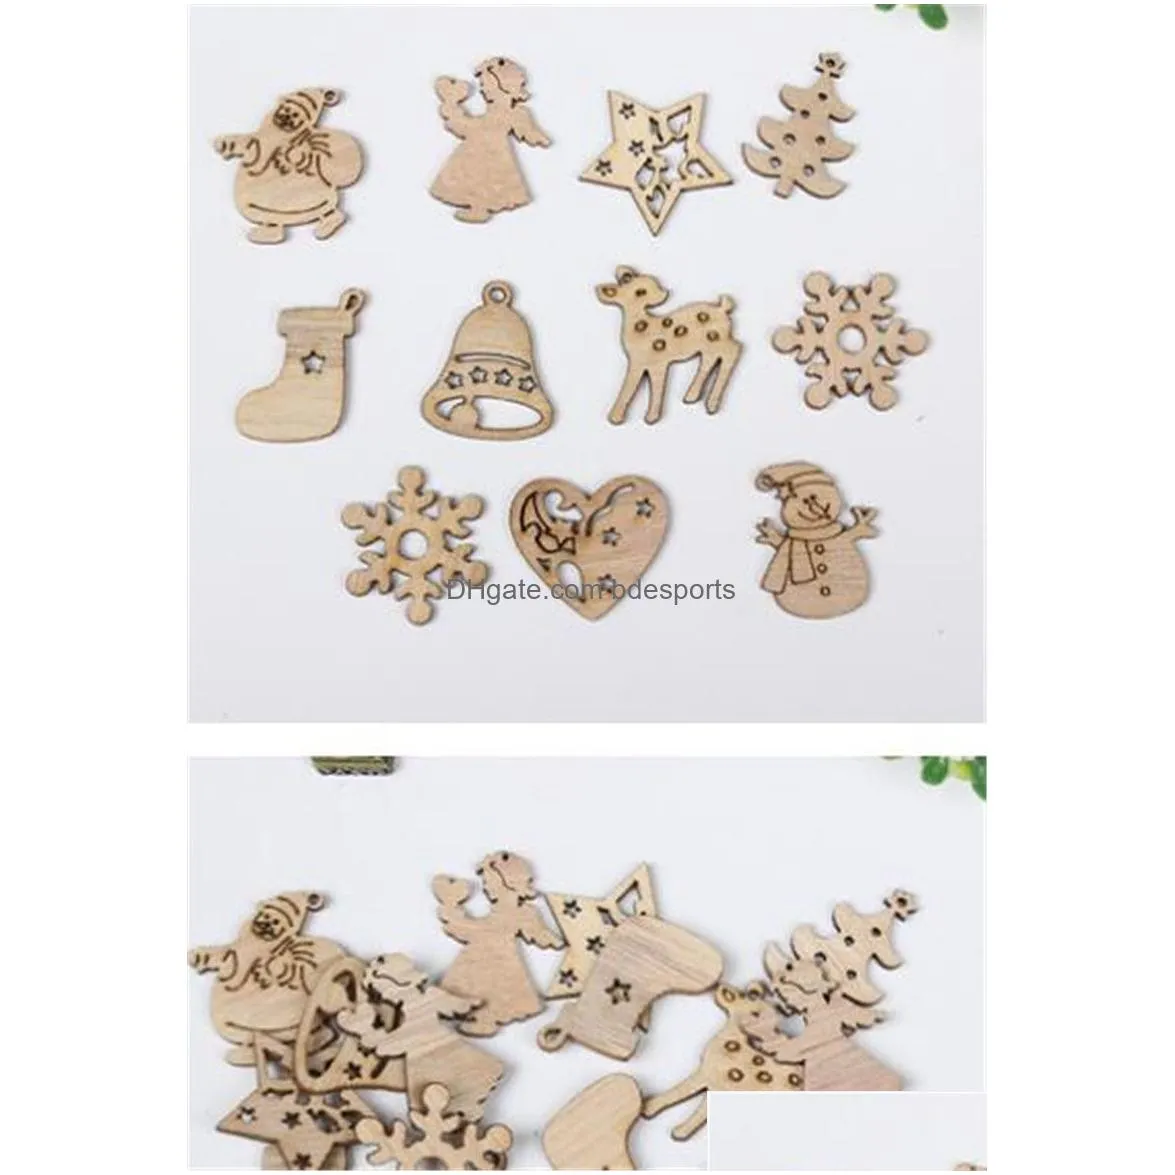 diy natural wooden chip christmas tree hanging ornaments pendant kids gifts snowman tree shape xmas ornaments decorations